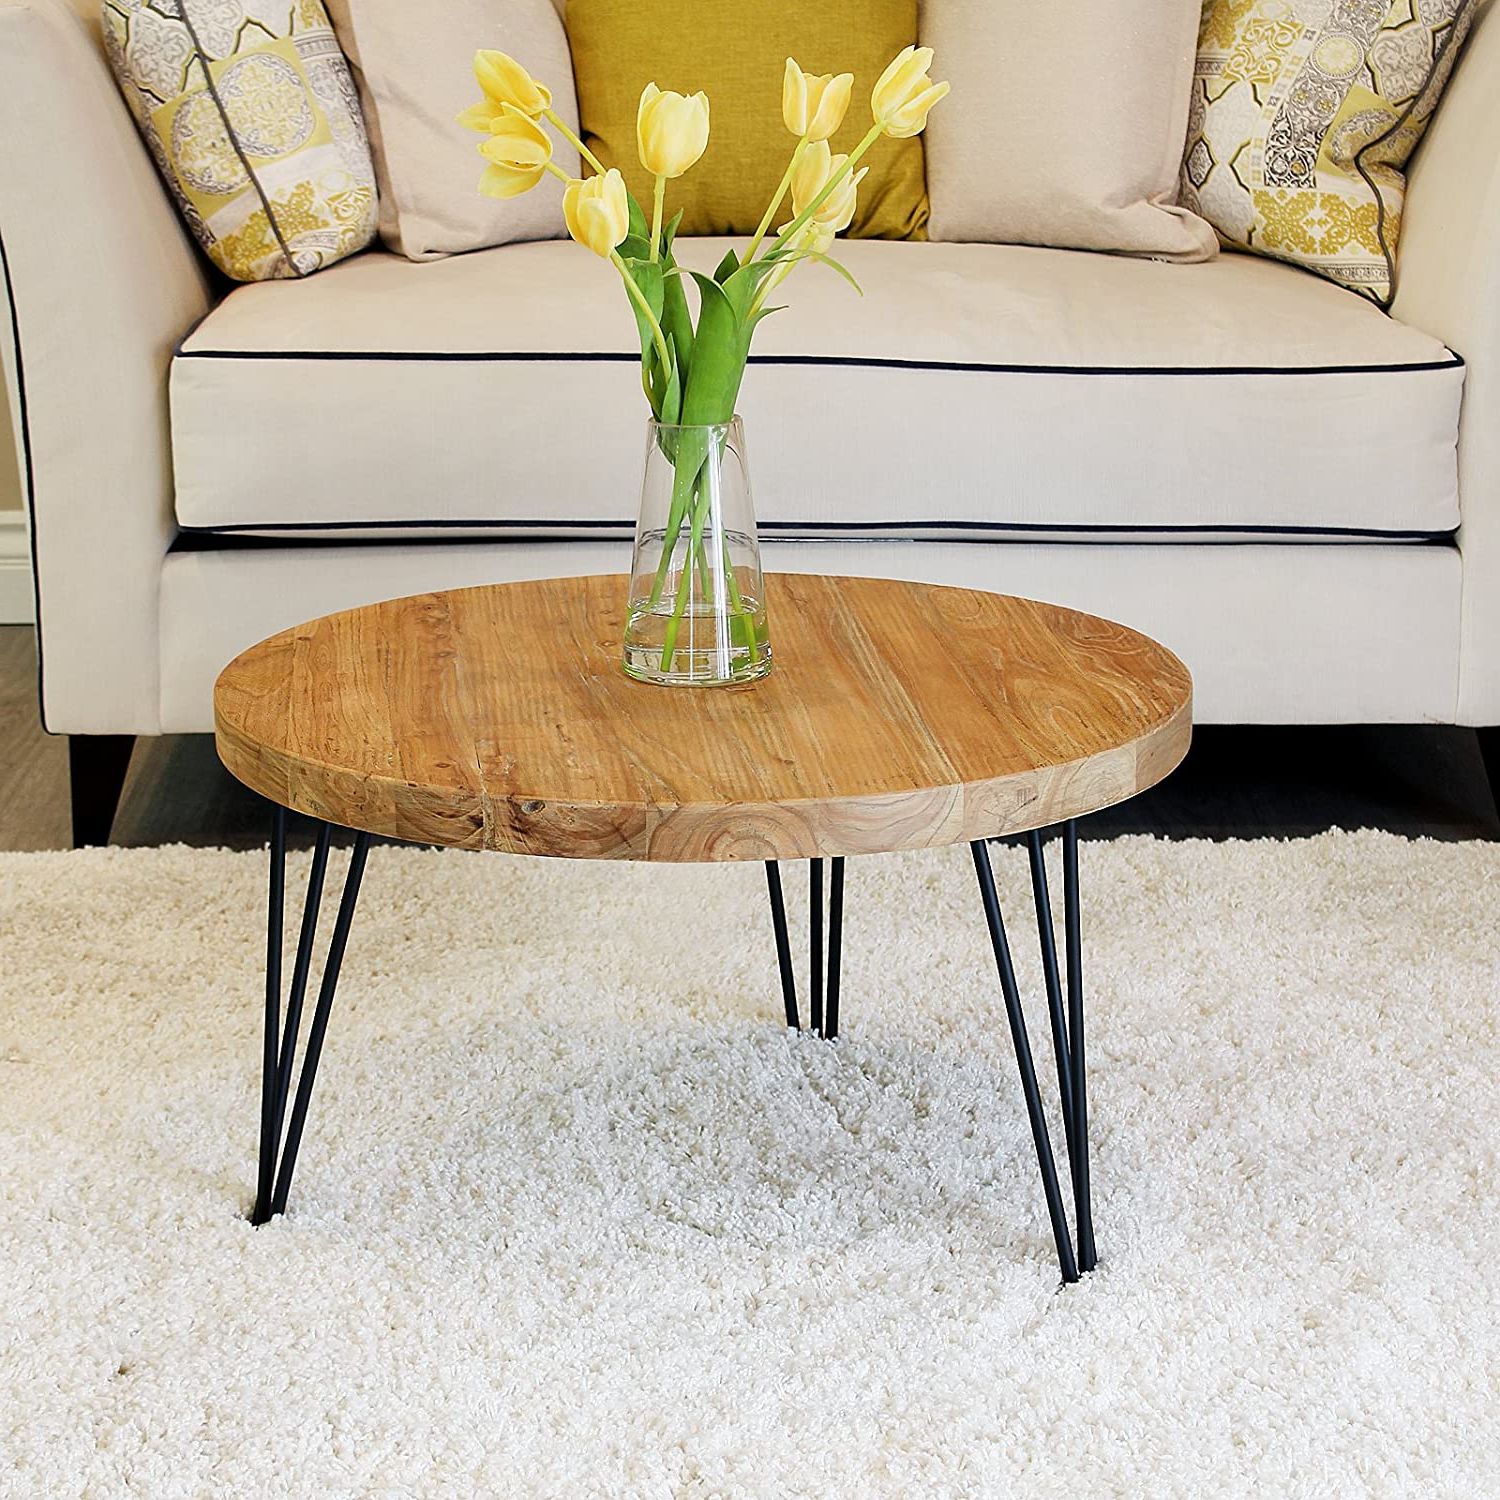 Reclaimed Solid Wood Table With Best And Newest Coffee Tables With Round Wooden Tops (View 10 of 15)